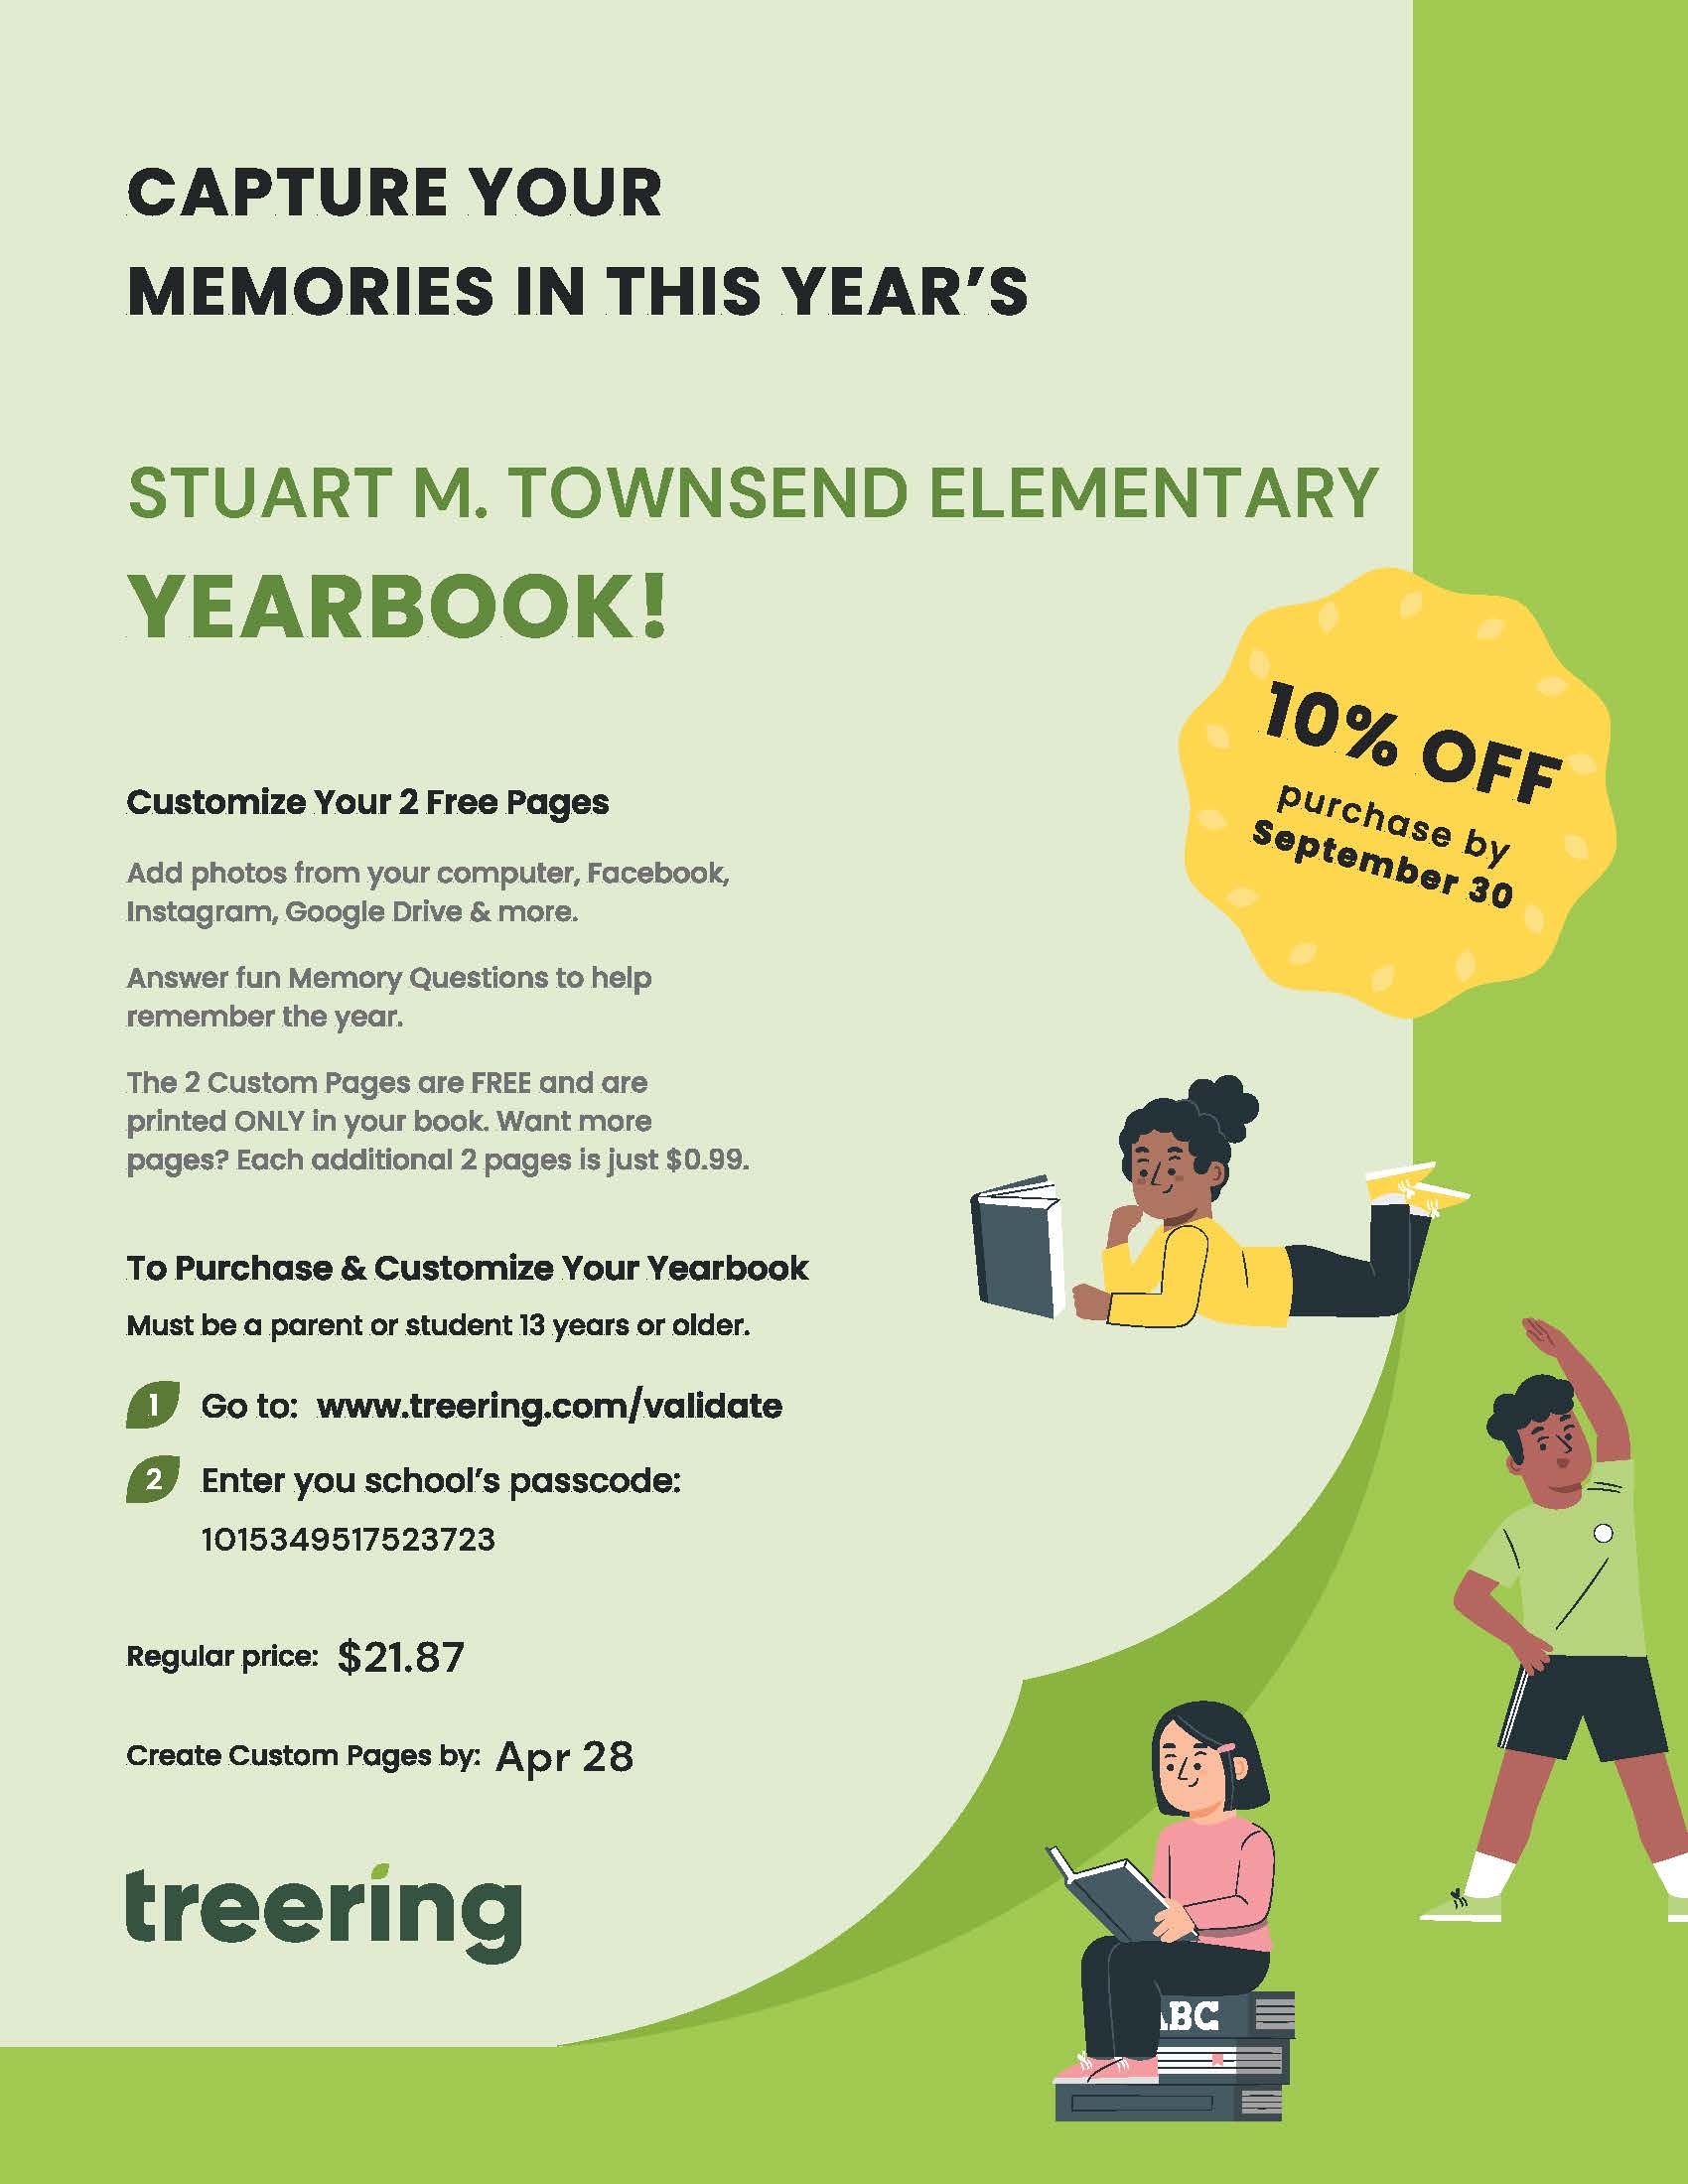 10 percent off SMTES Yearbook during month of September